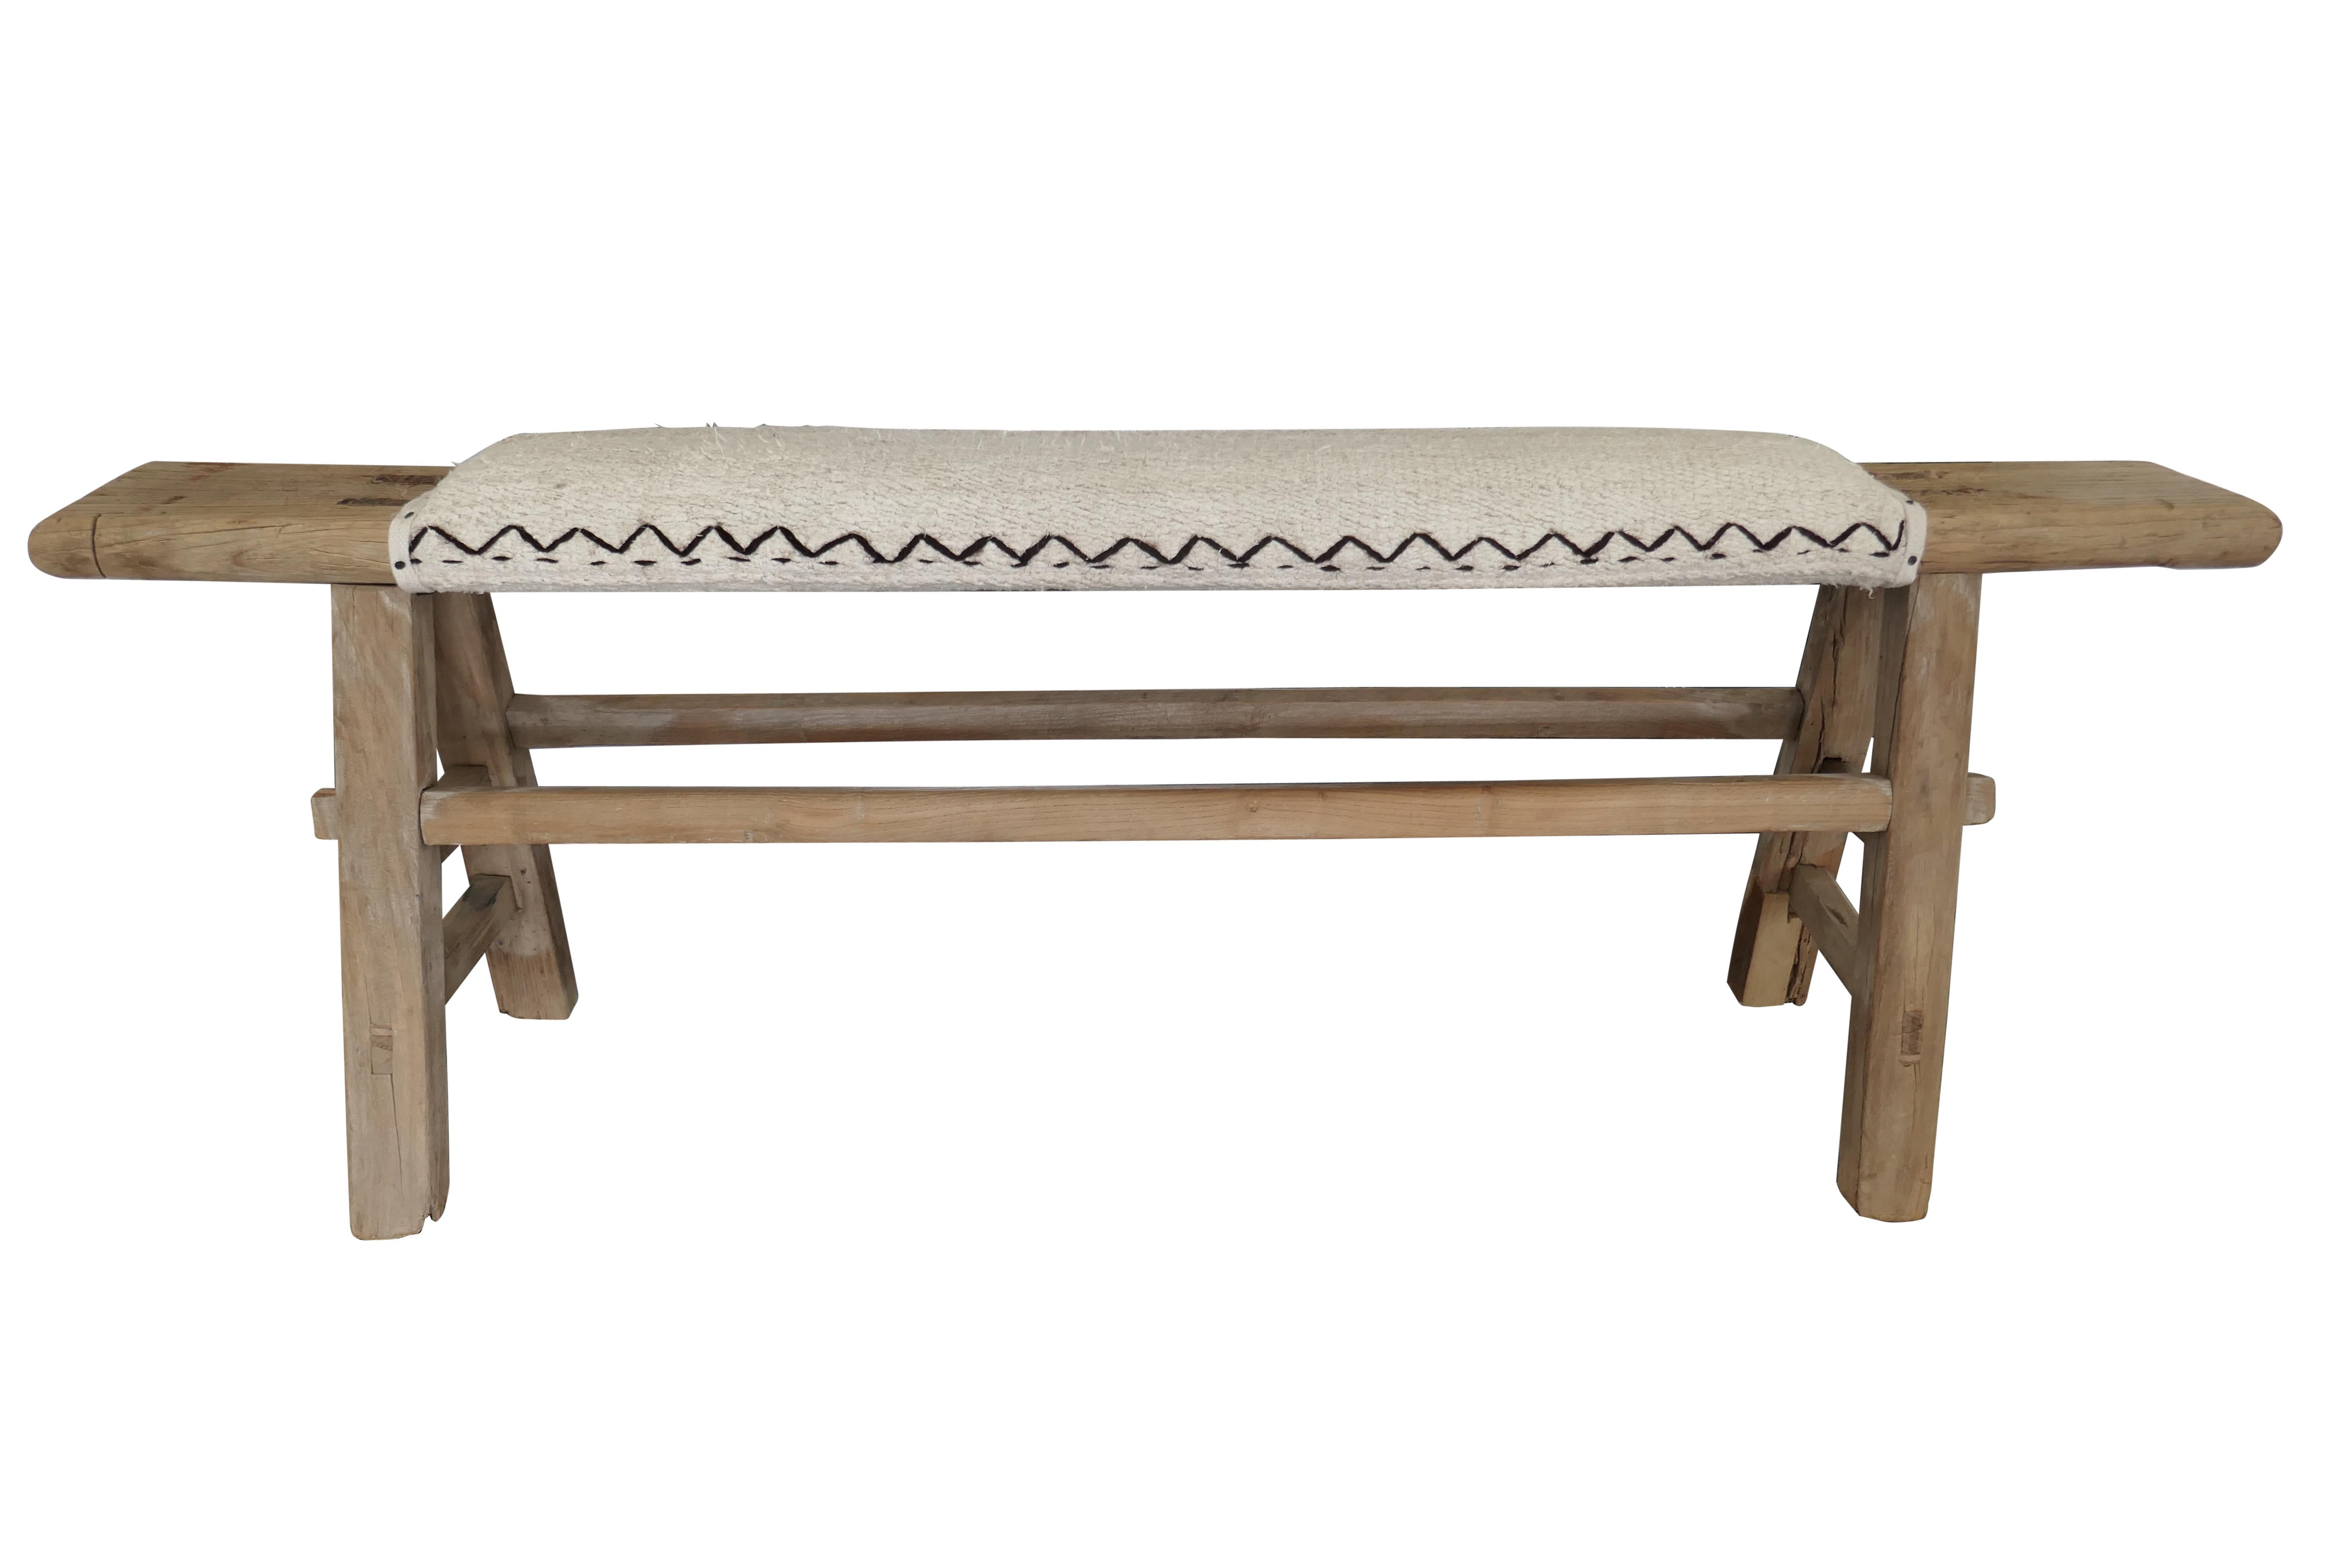 One-of-a-Kind!
Our authentic antique Asian Shandong bench, primitively hand-built of solid heavy-weight raw elmwood. Constructed with early mortise & tenon joinery, showing much desirable history characteristics. Cushioned top, perfectly